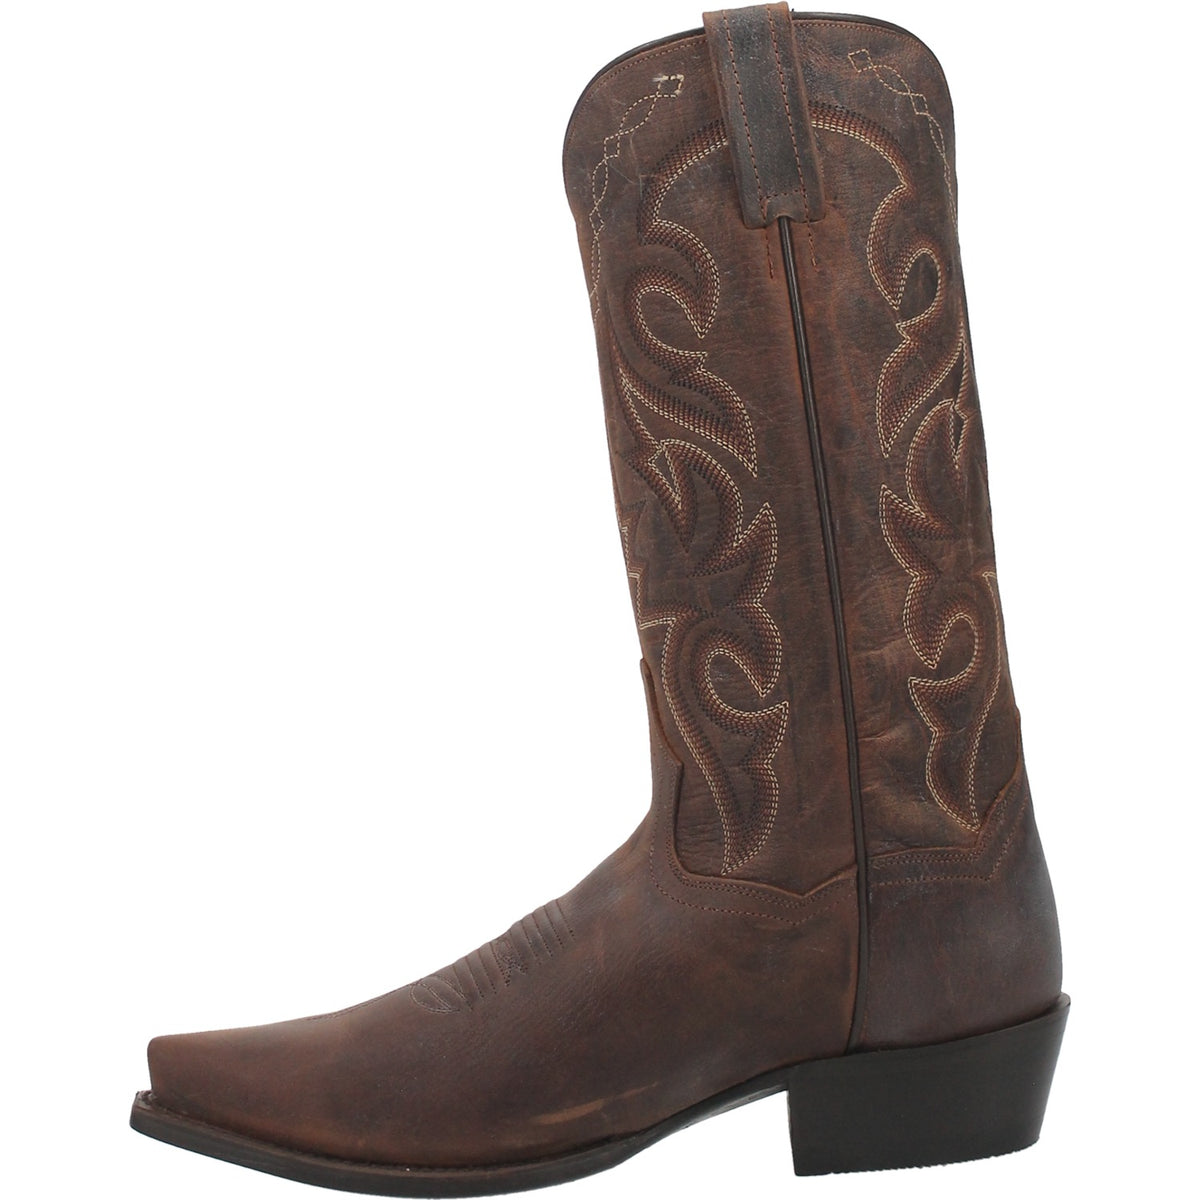 RENEGADE S LEATHER BOOT Cover